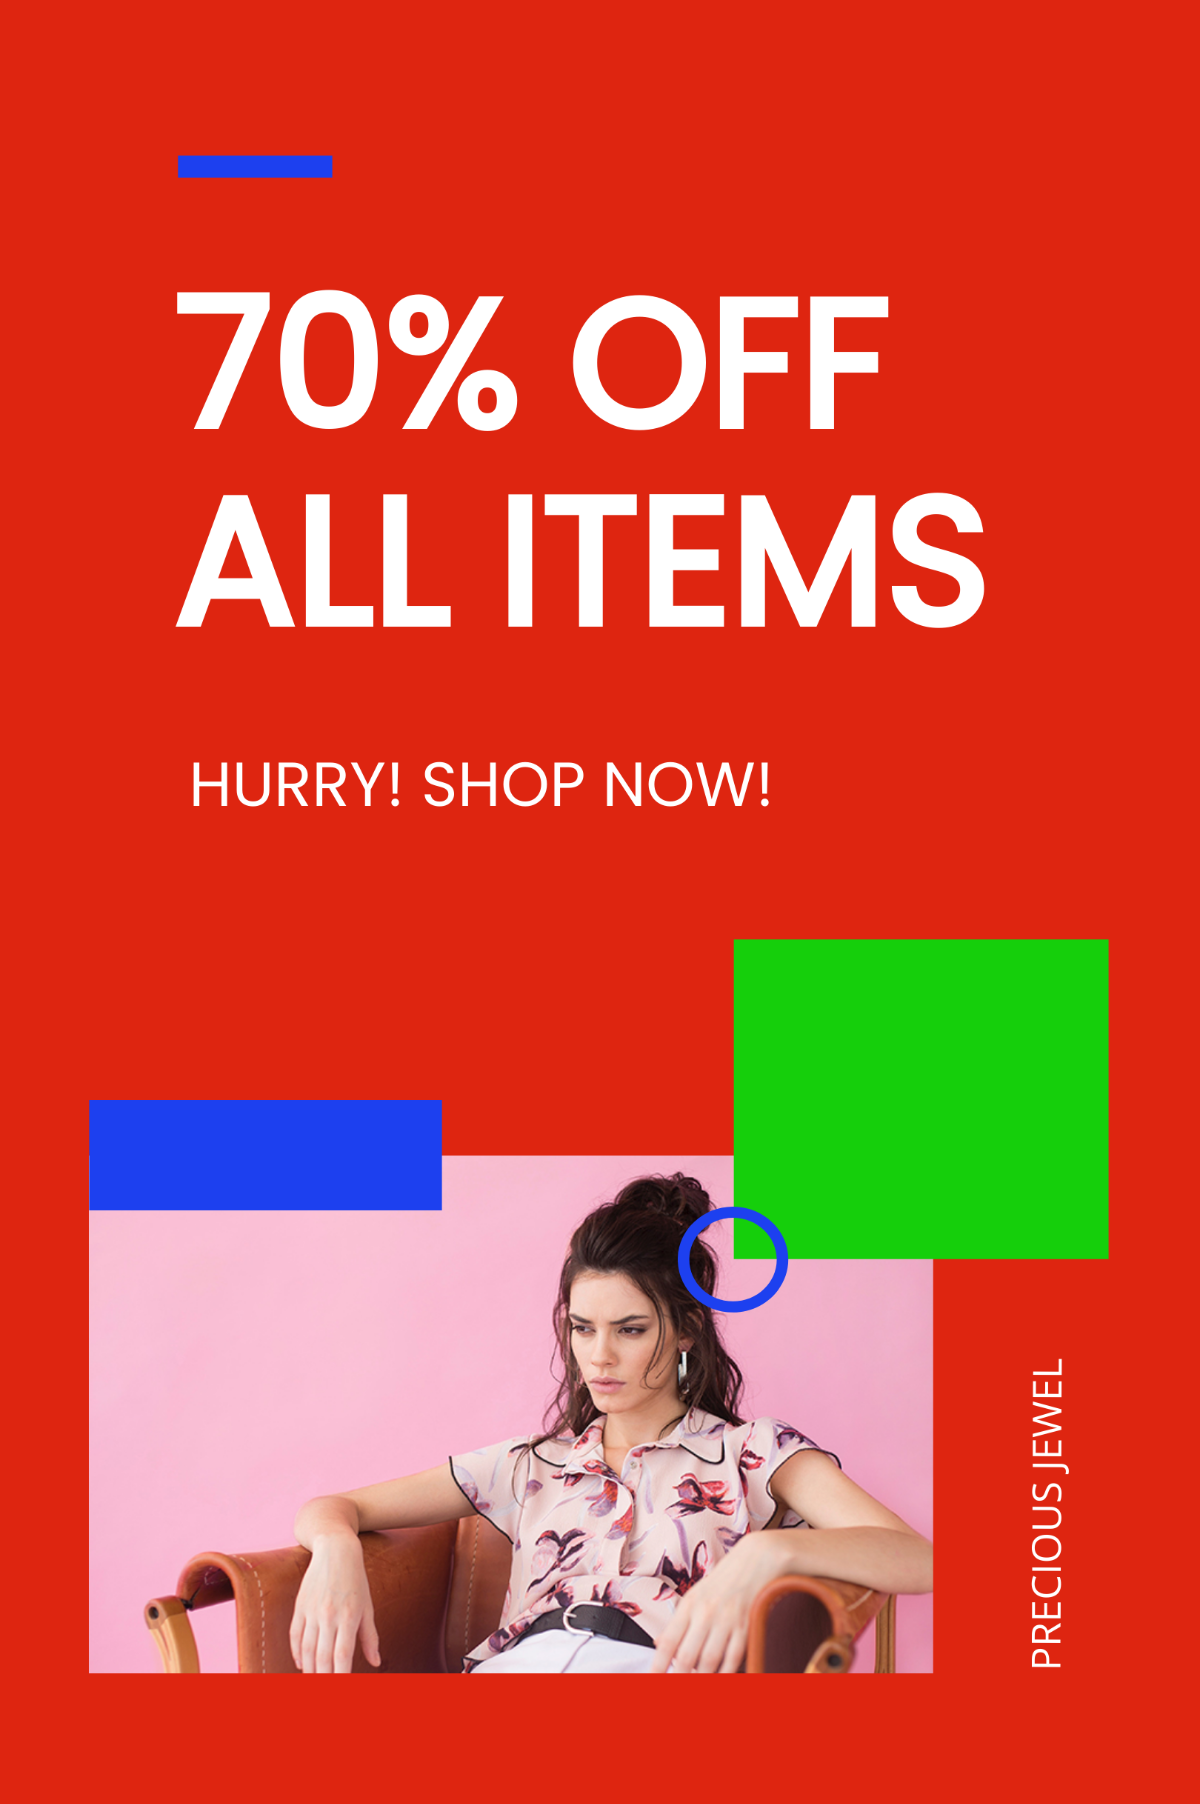 Holiday Offer Sale Tumblr Post Template